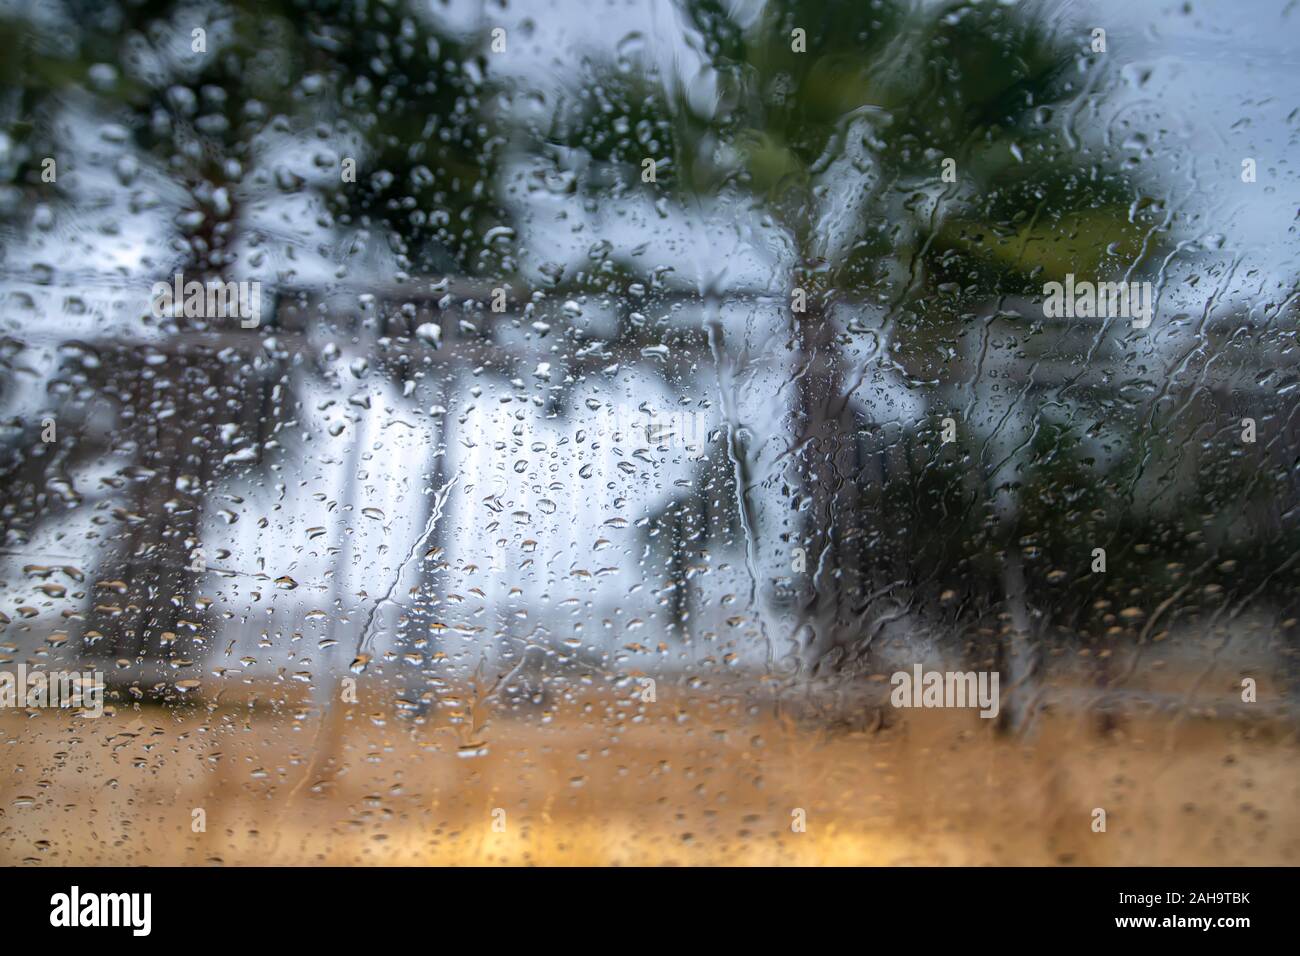 Palm trees in the wind through the glass with raindrops close up Stock Photo